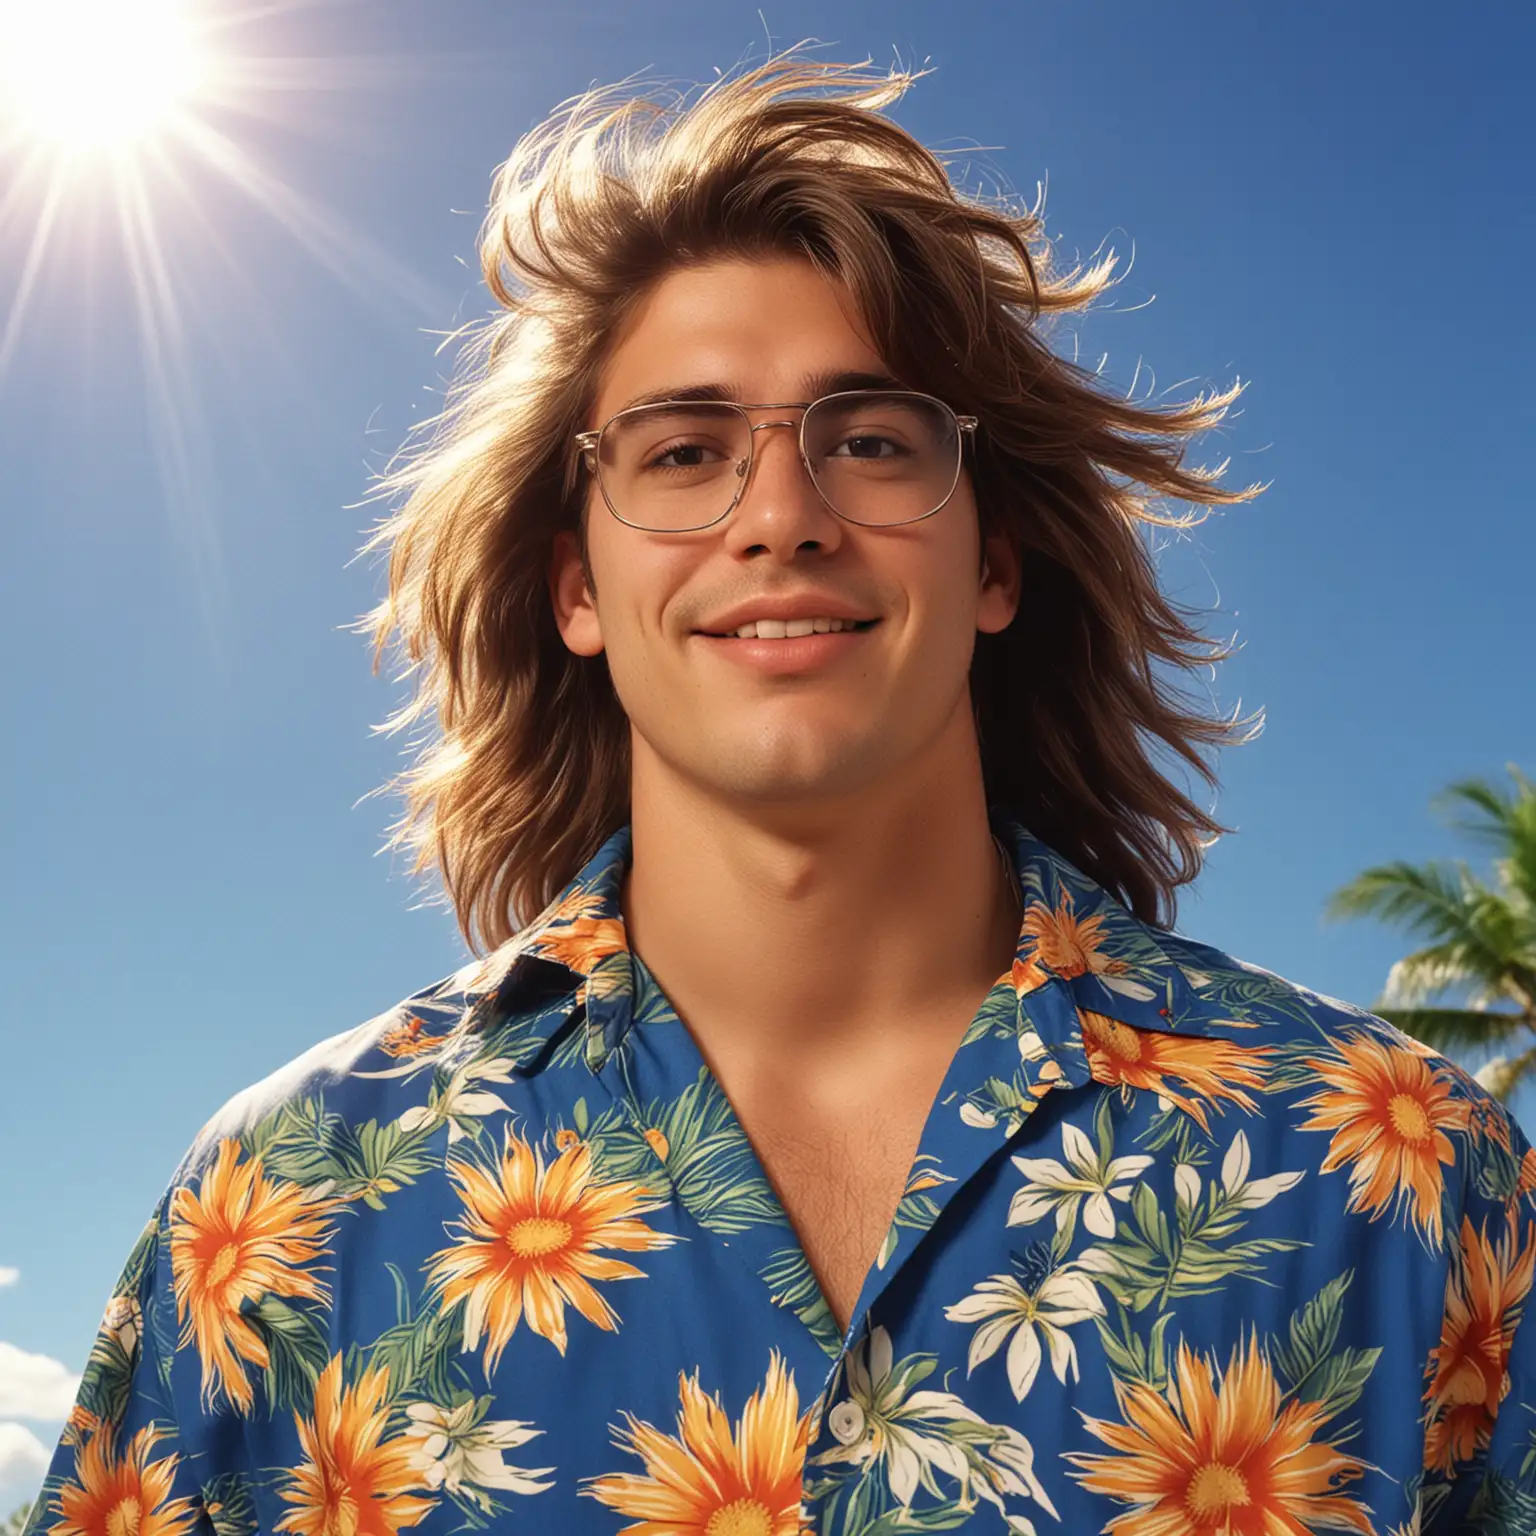 90's young man with glasses, really thick hair, hawaiian shirt shirt, blue sky and sunshine background with sunburst